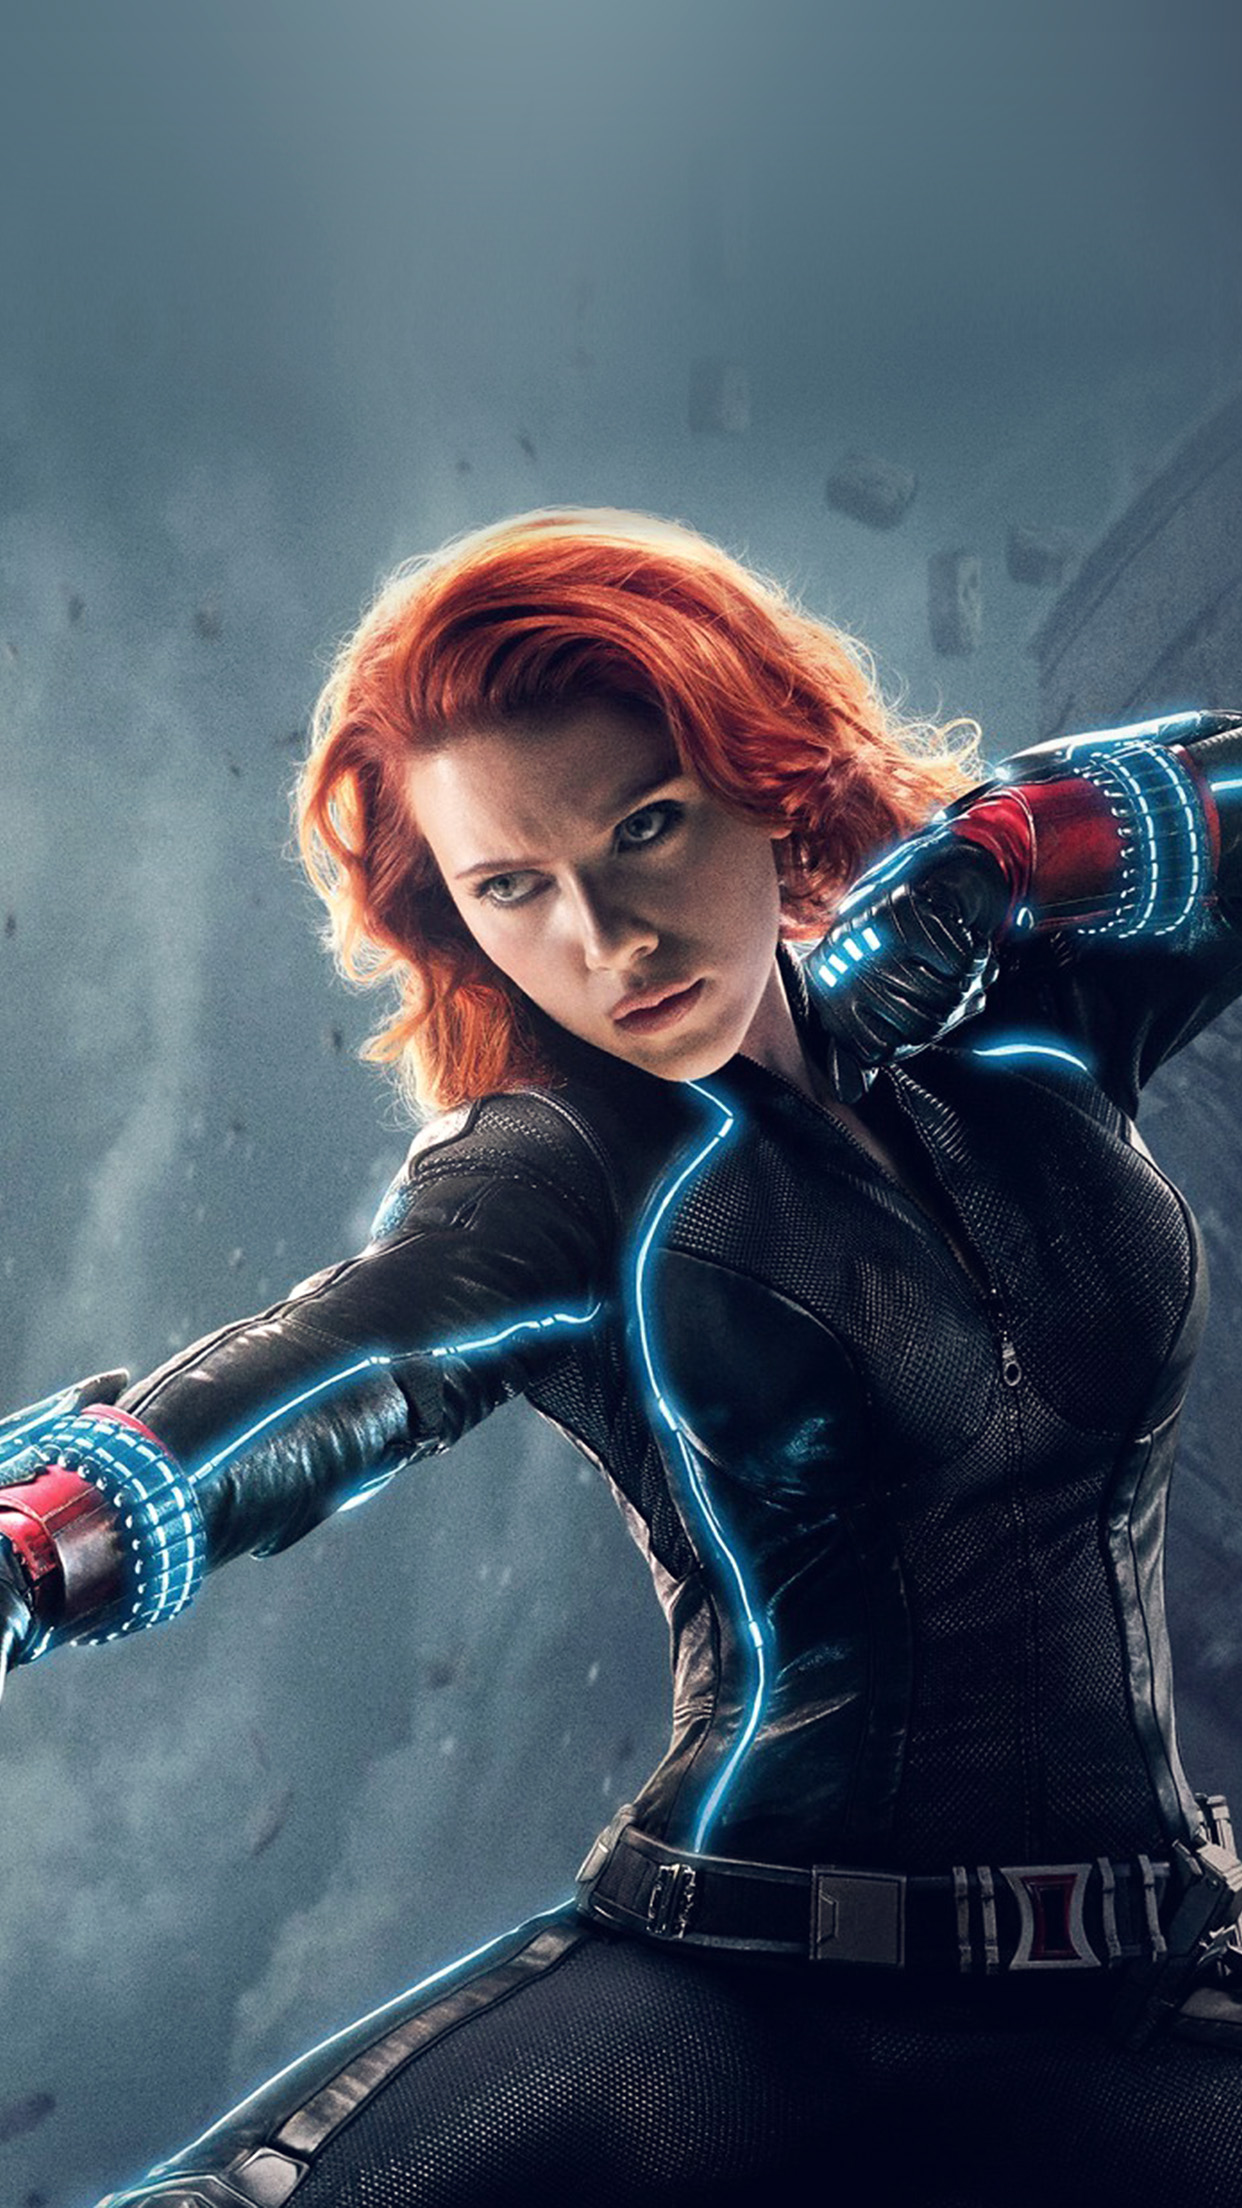 Avengers Age Of Ultron Black Widow Hero Film Android wallpaper